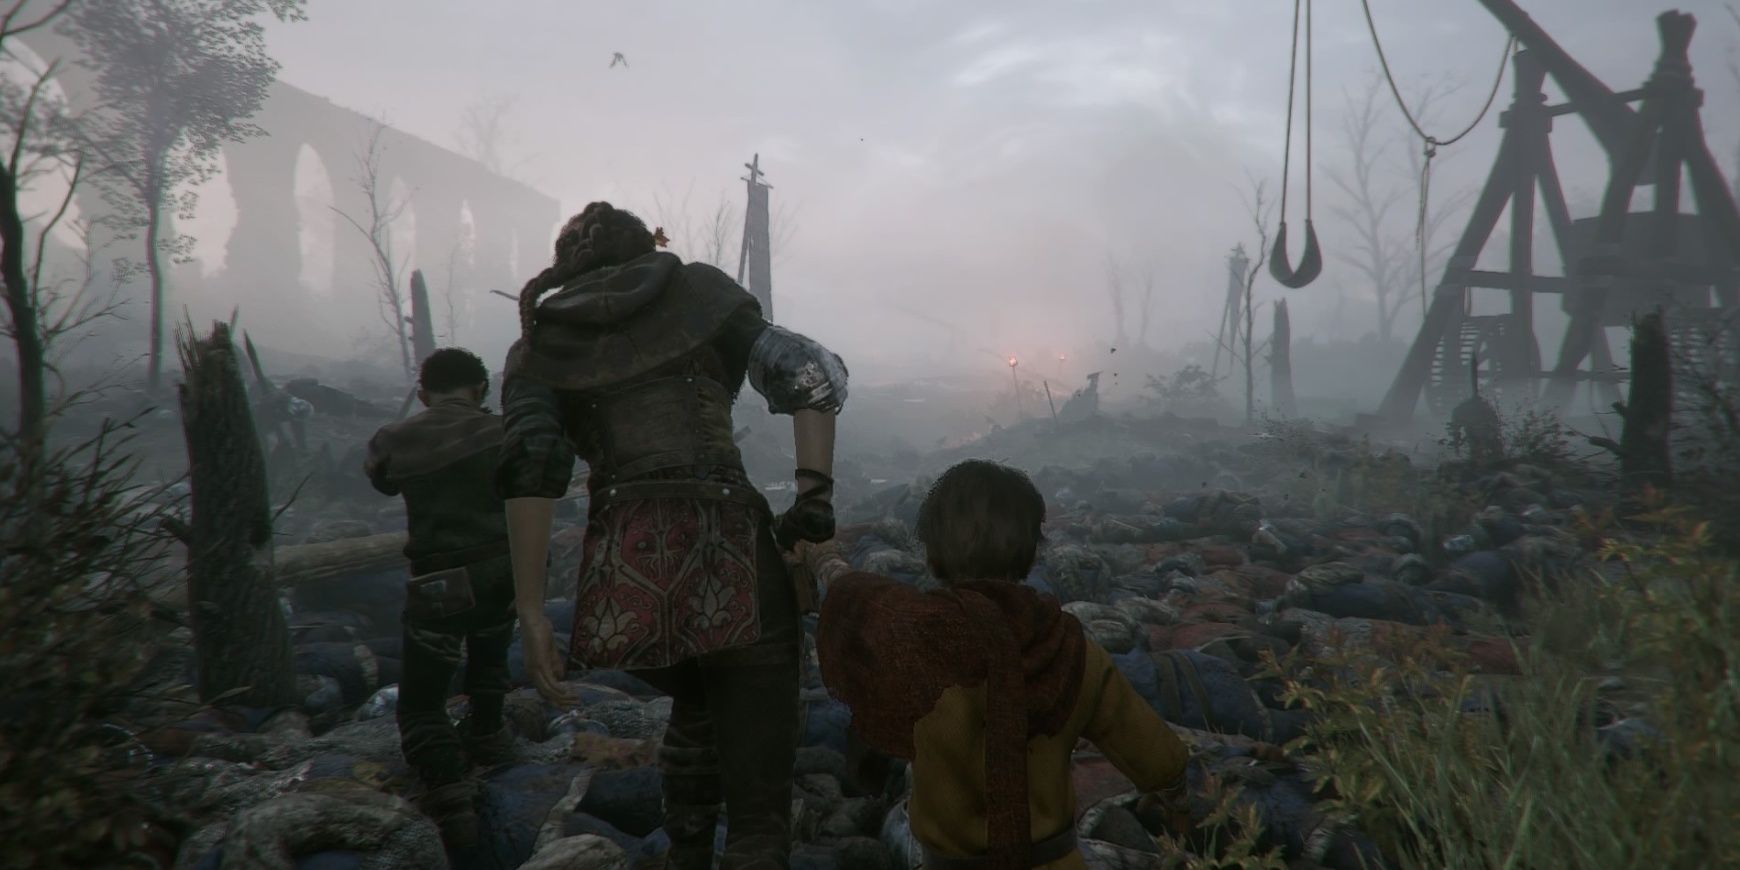 A Medieval Battlefield From A Plague Tale Innocence